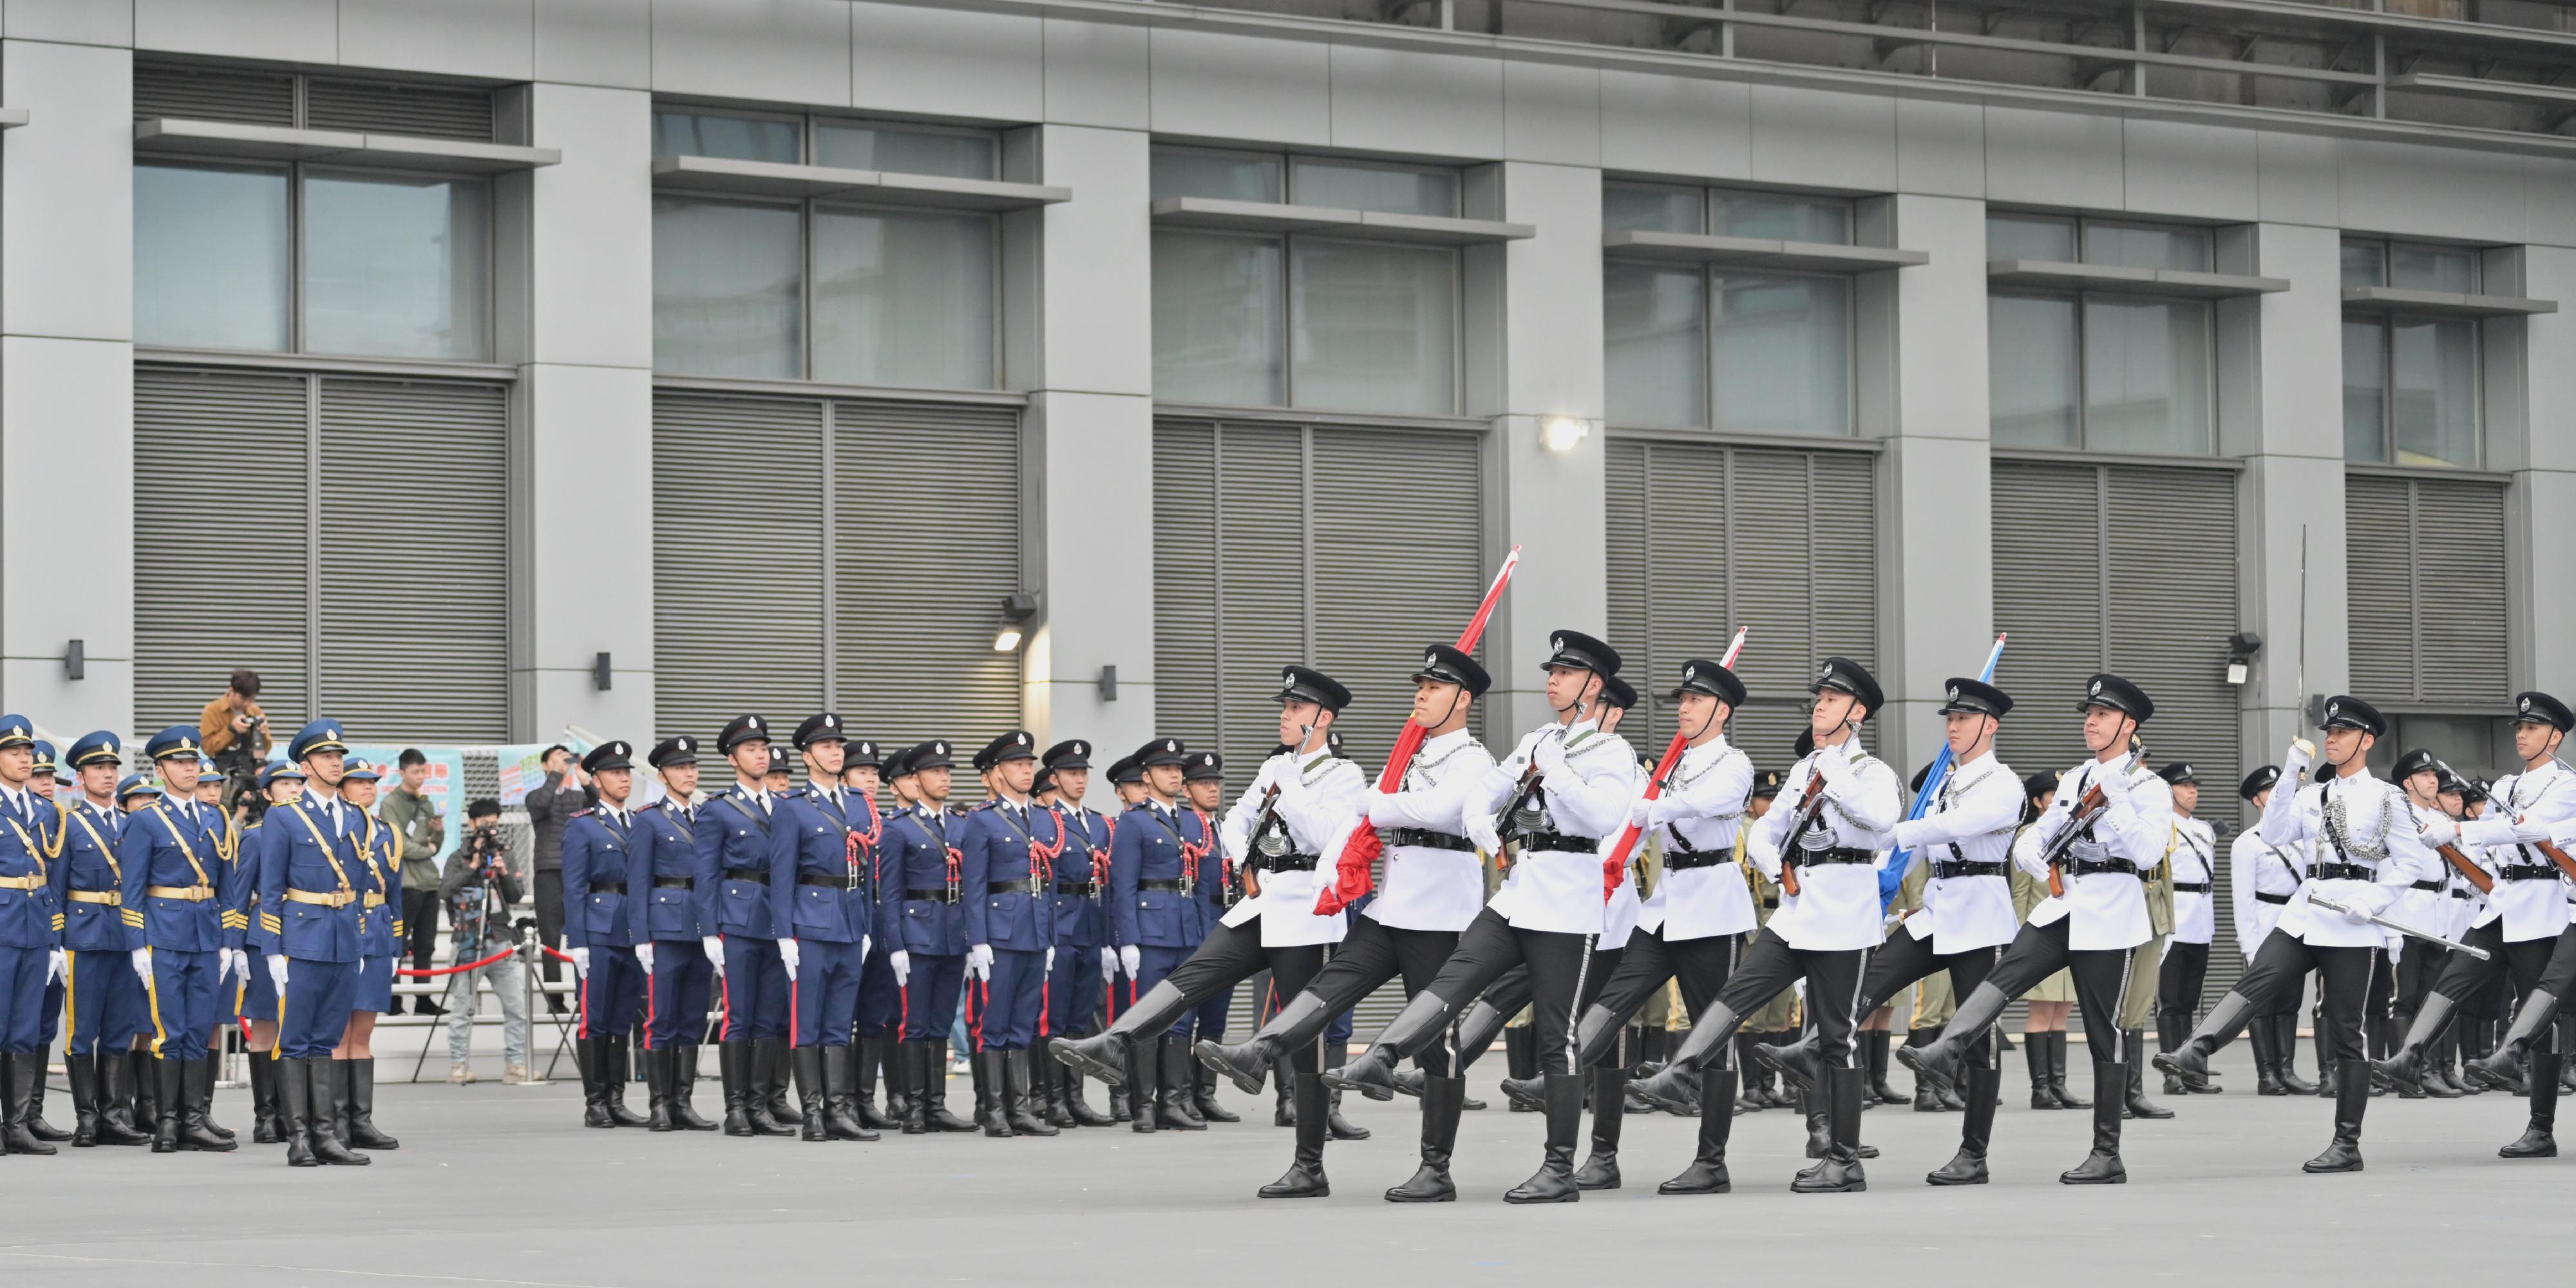 The Security Bureau today (December 4) held the Constitution Day Flag Raising Ceremony. Photo shows the disciplined services ceremonial guard and the flag party marching into the venue with Chinese-style foot drill and conducting the flag-raising ceremony.